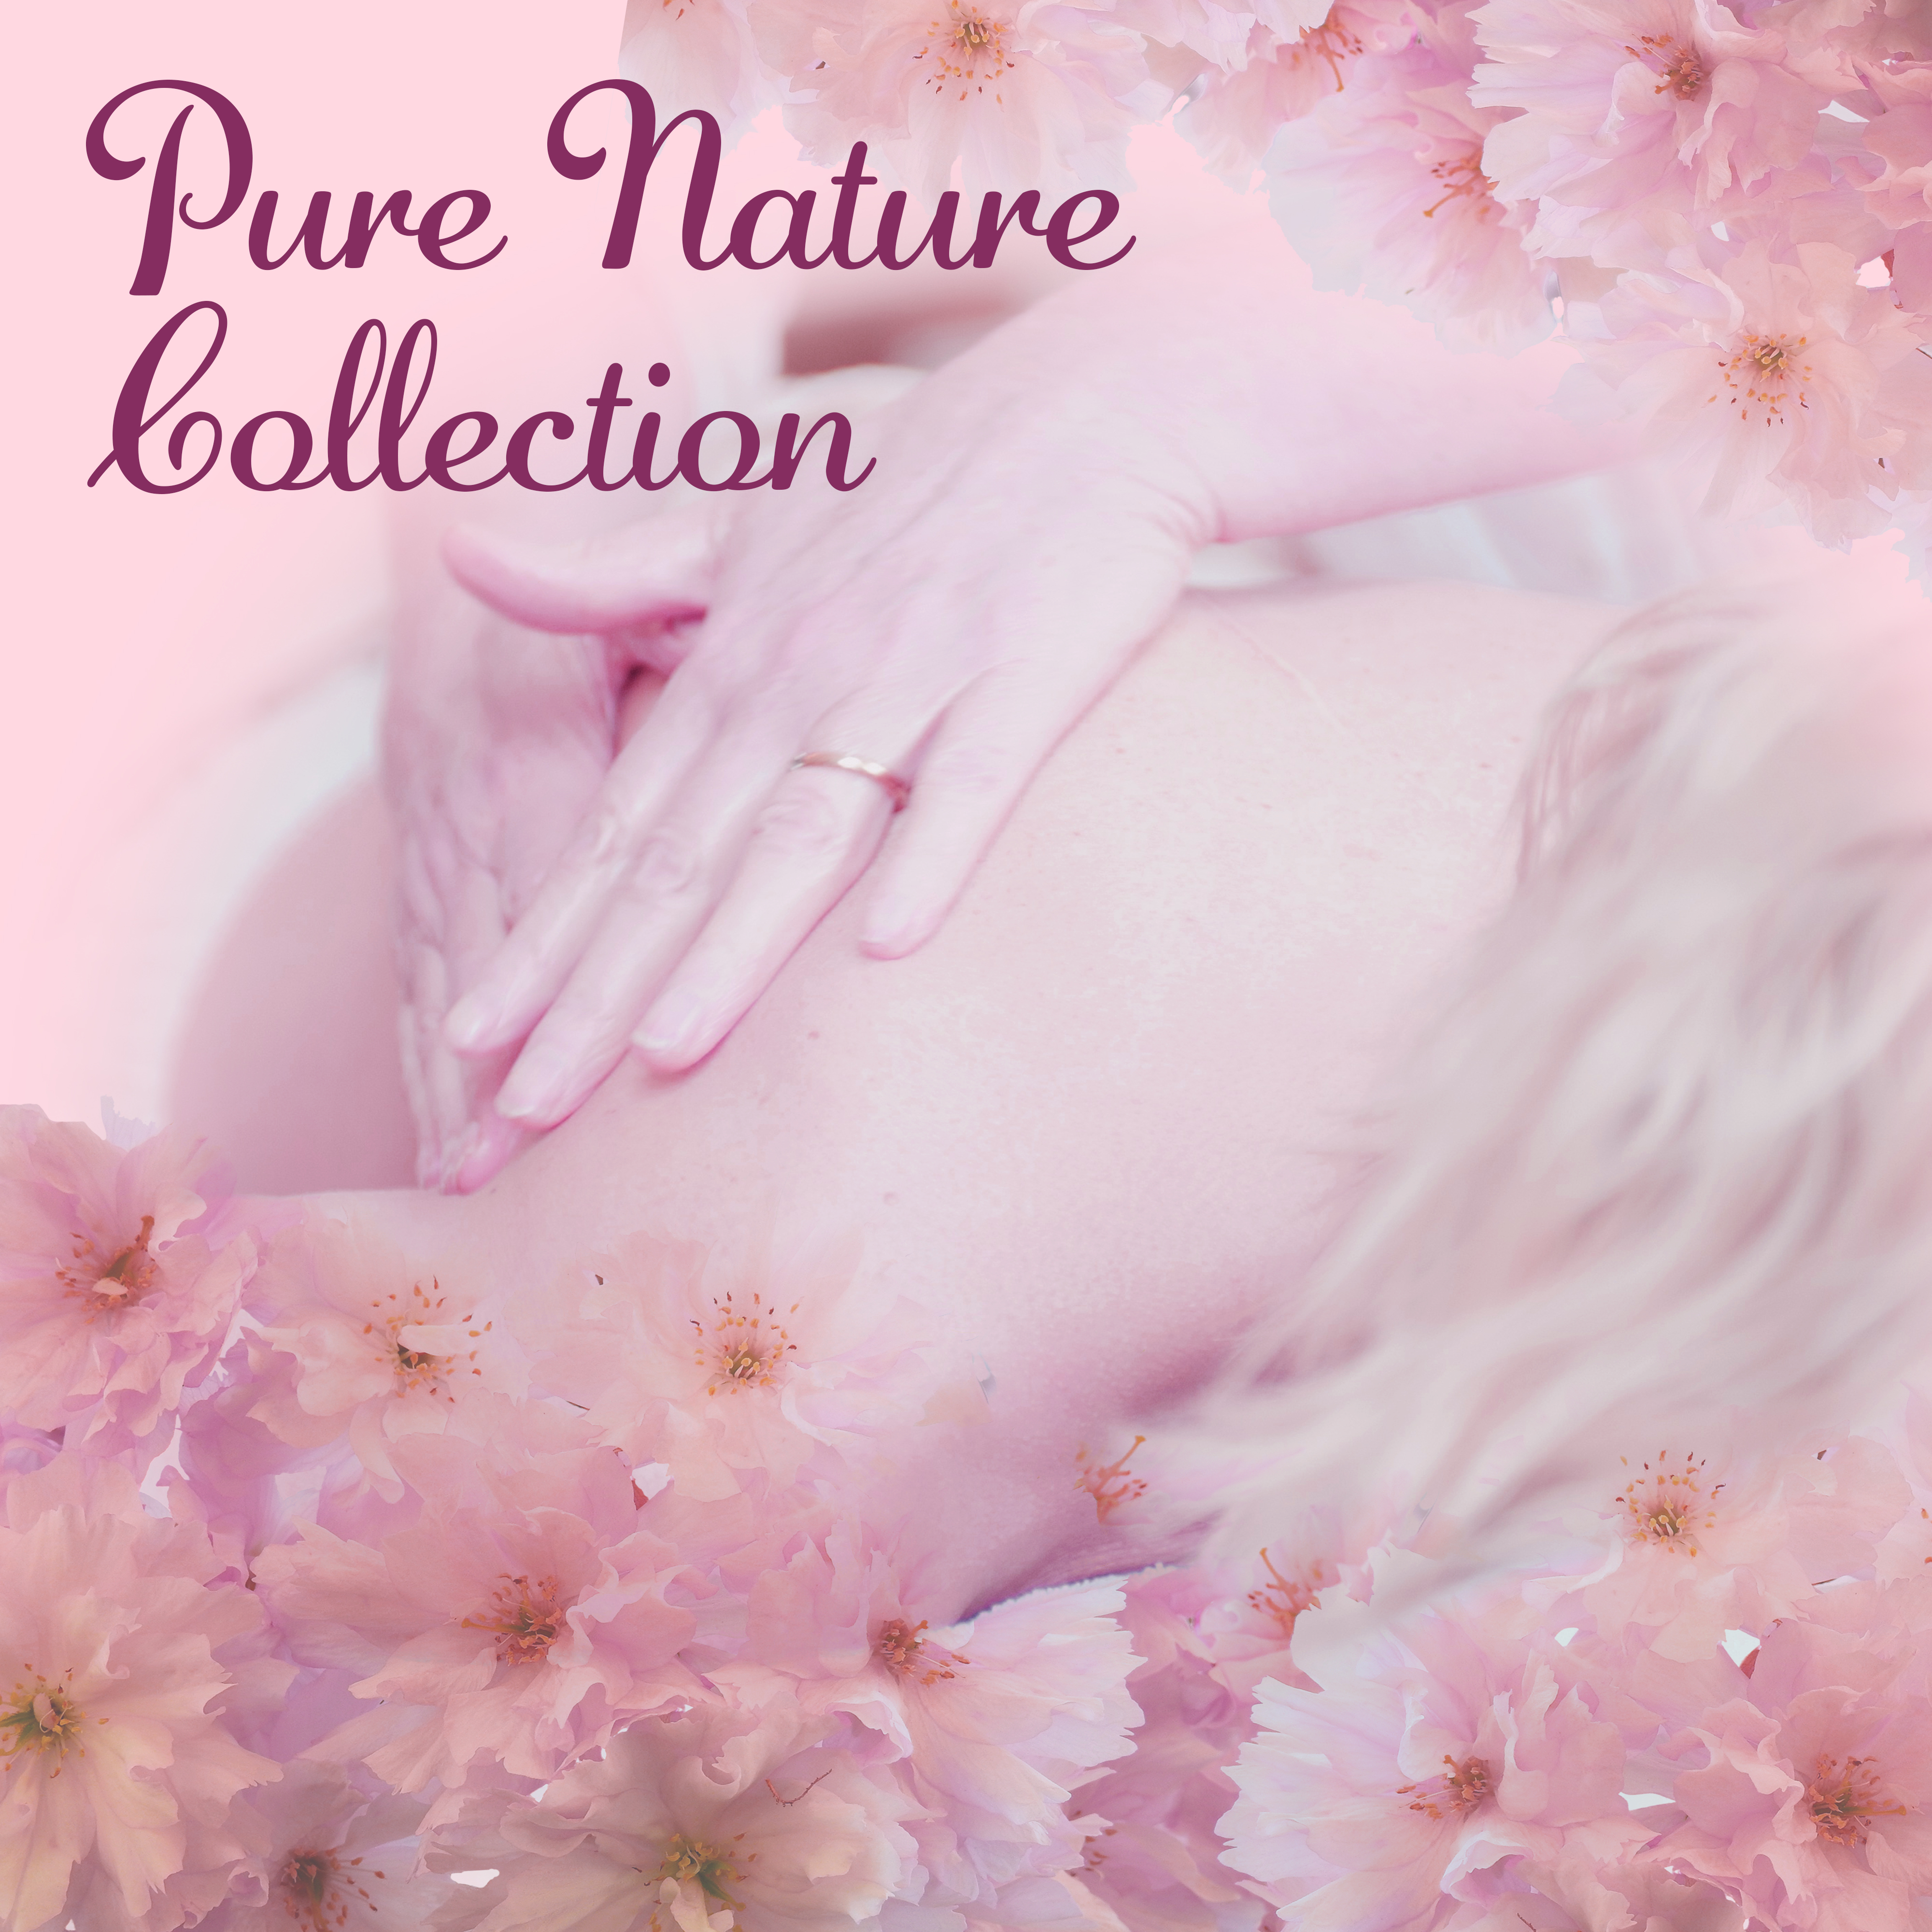 Pure Nature Collection  Instrumental Sounds of Nature, Tantra, Erotic Massage, Relaxation, Sleep